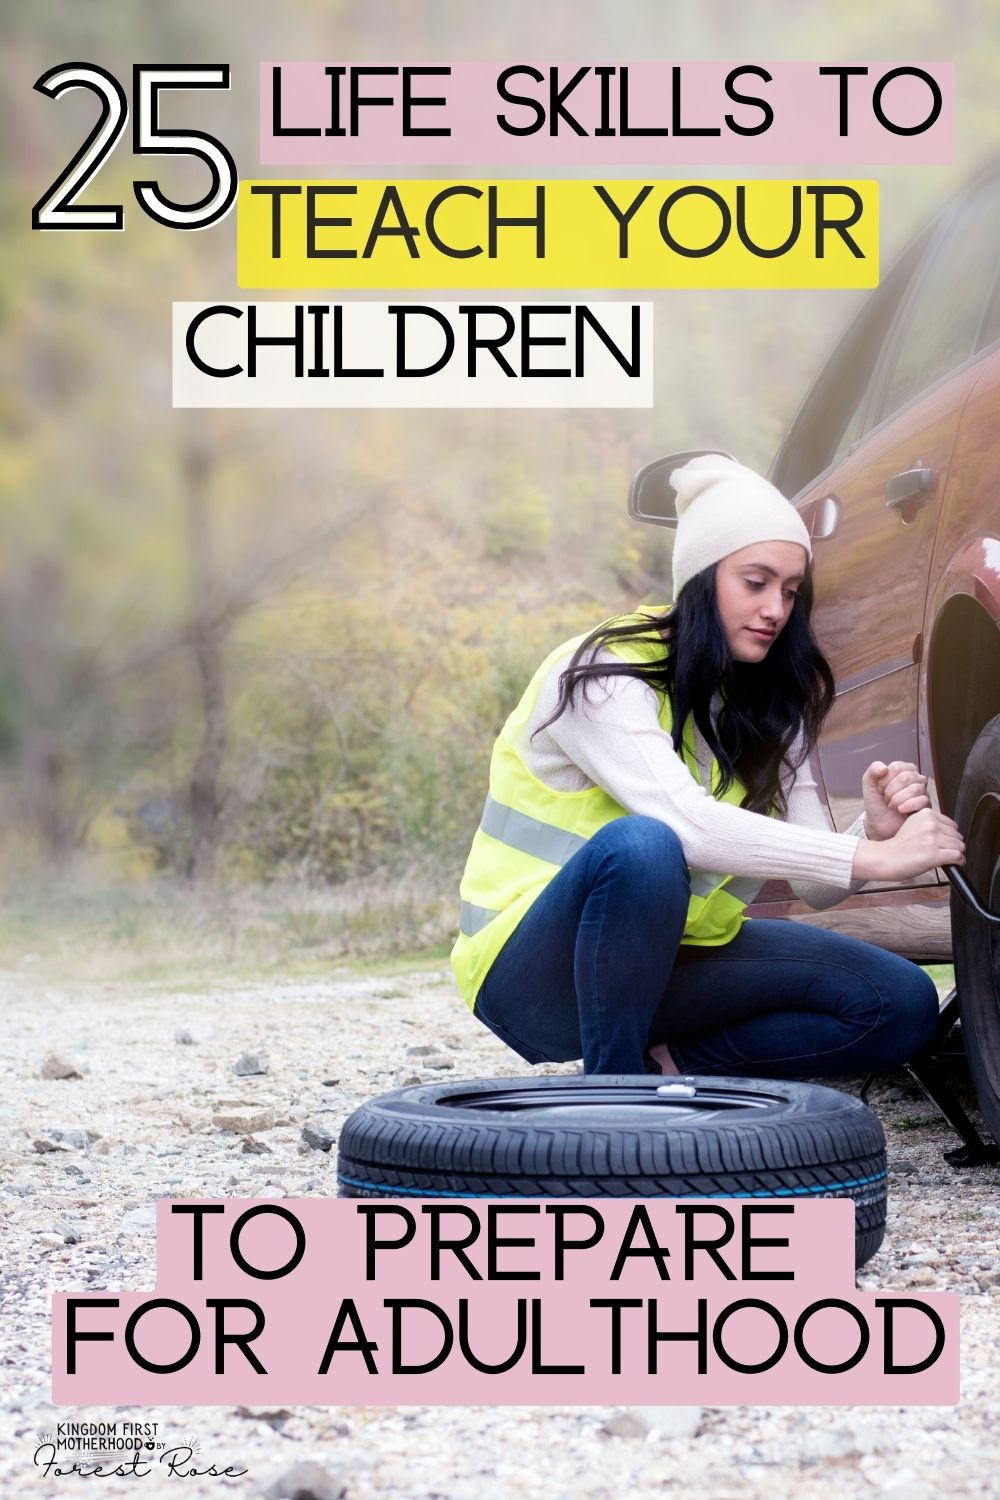 25 Life Skills to Teach to Your Children to Prepare for Adulthood